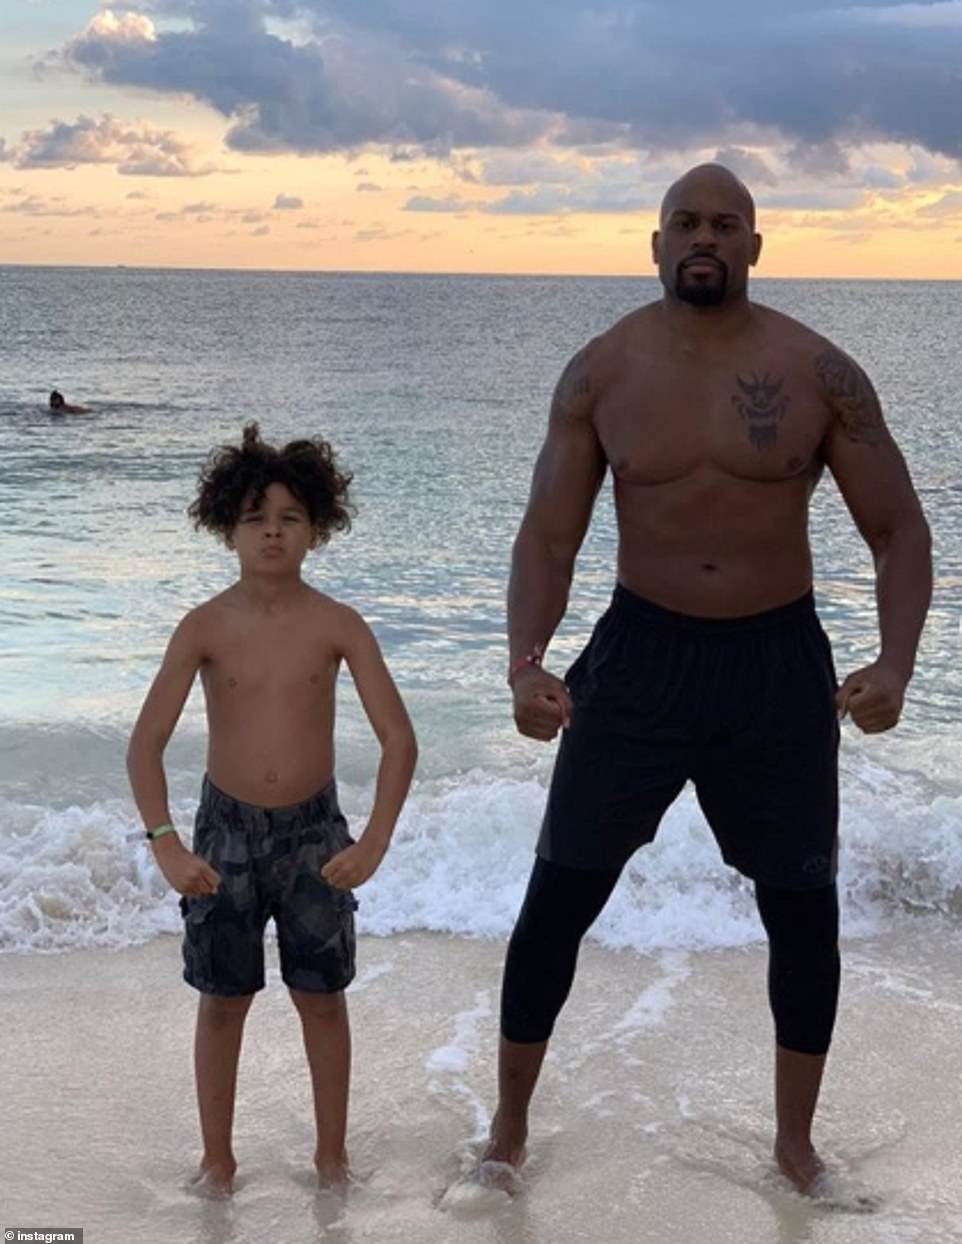 WWE star Shad Gaspard went missing while swimming with his 10 year old son after being pulled out to sea by a strong current.